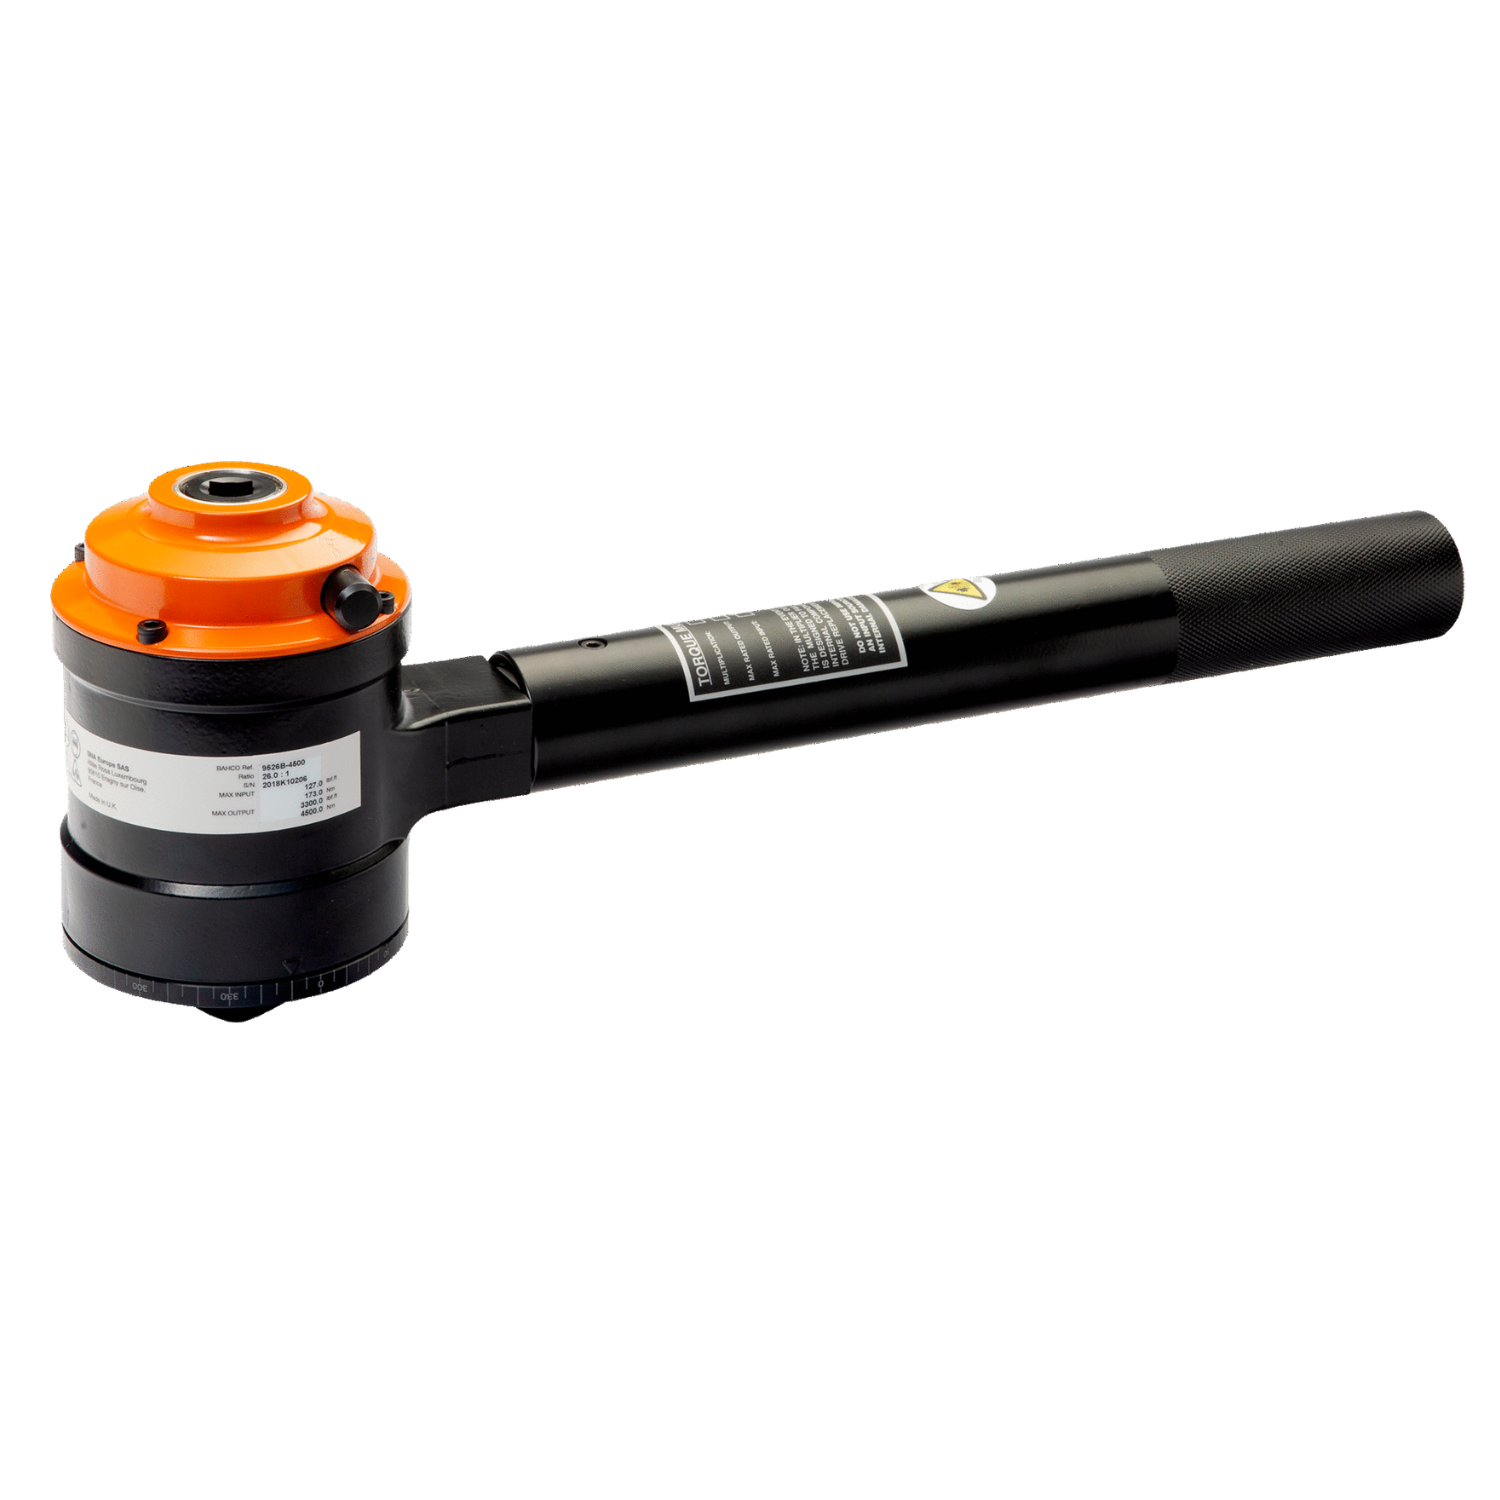 BAHCO 95155B 9526B Hand Torque Multiplier with Arm (BAHCO Tools) - Premium Torque Multiplier from BAHCO - Shop now at Yew Aik.